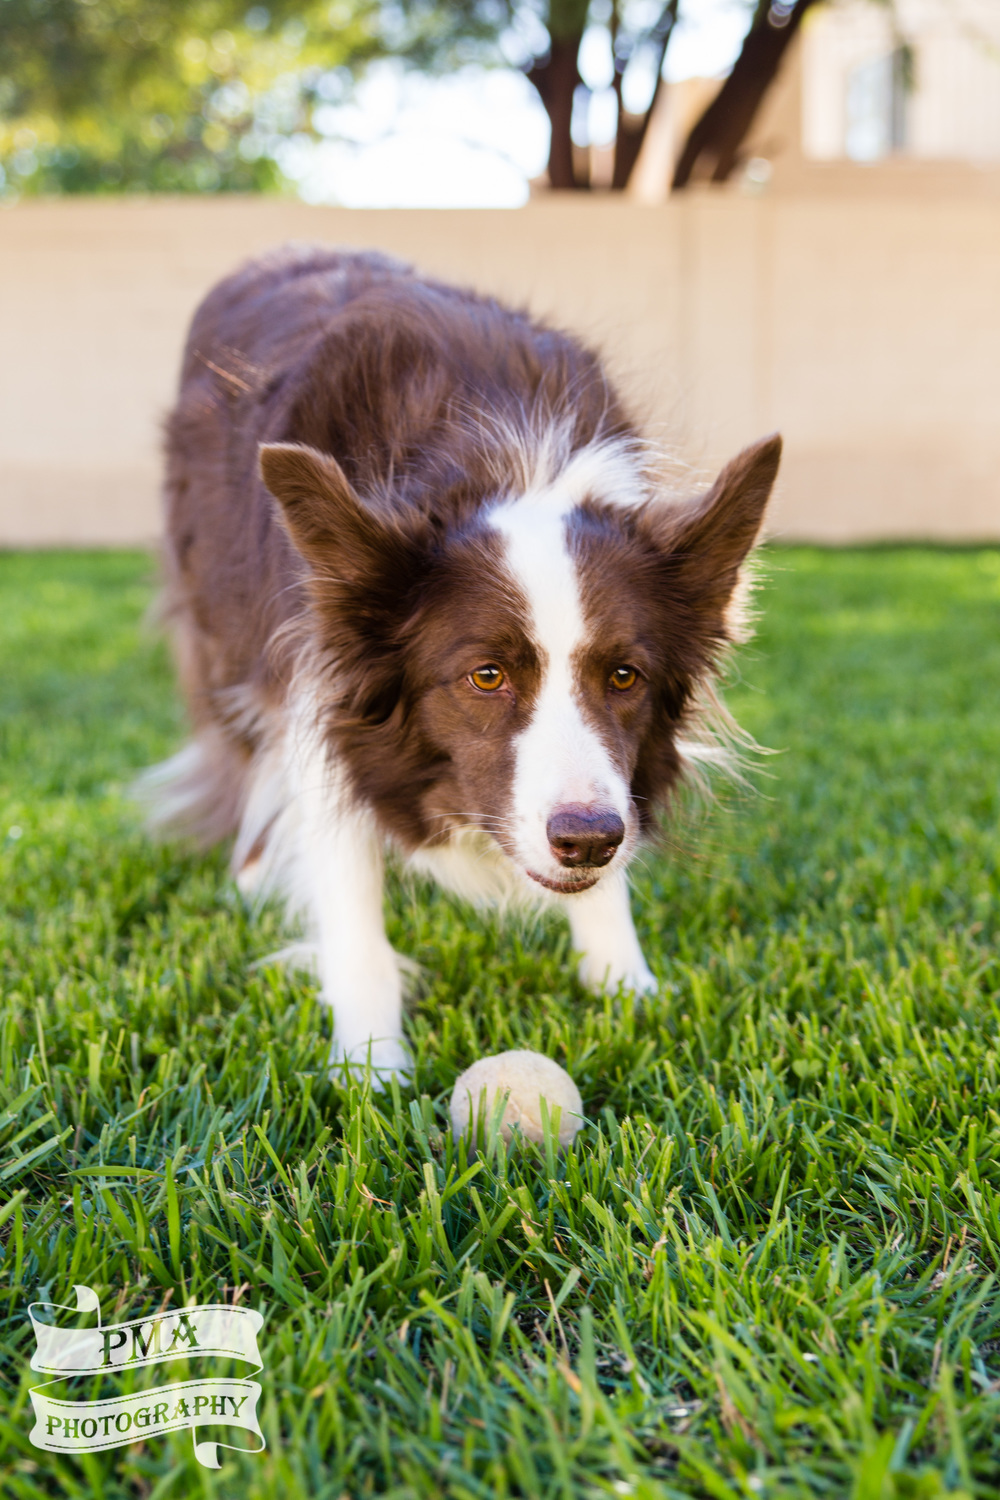 5 Tips for Better Pet Photography - Dogs by PMA Photography of Phoenix, Arizona